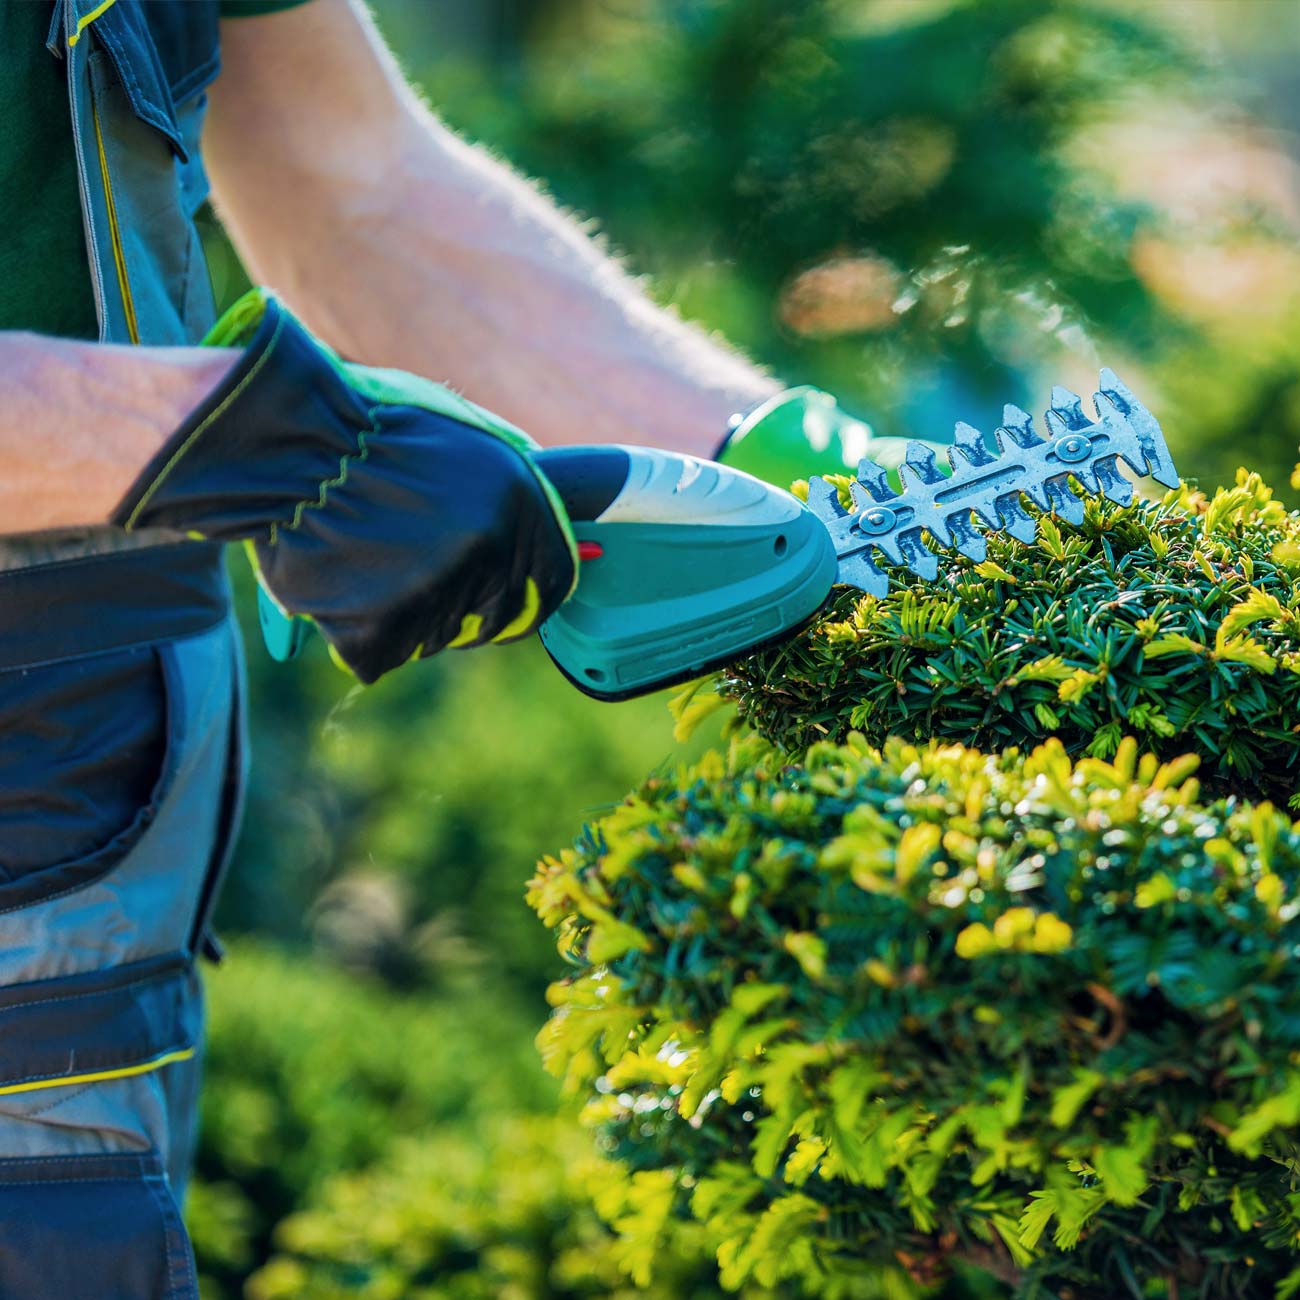 Gardener uses an electric trimmer to manicure bushes